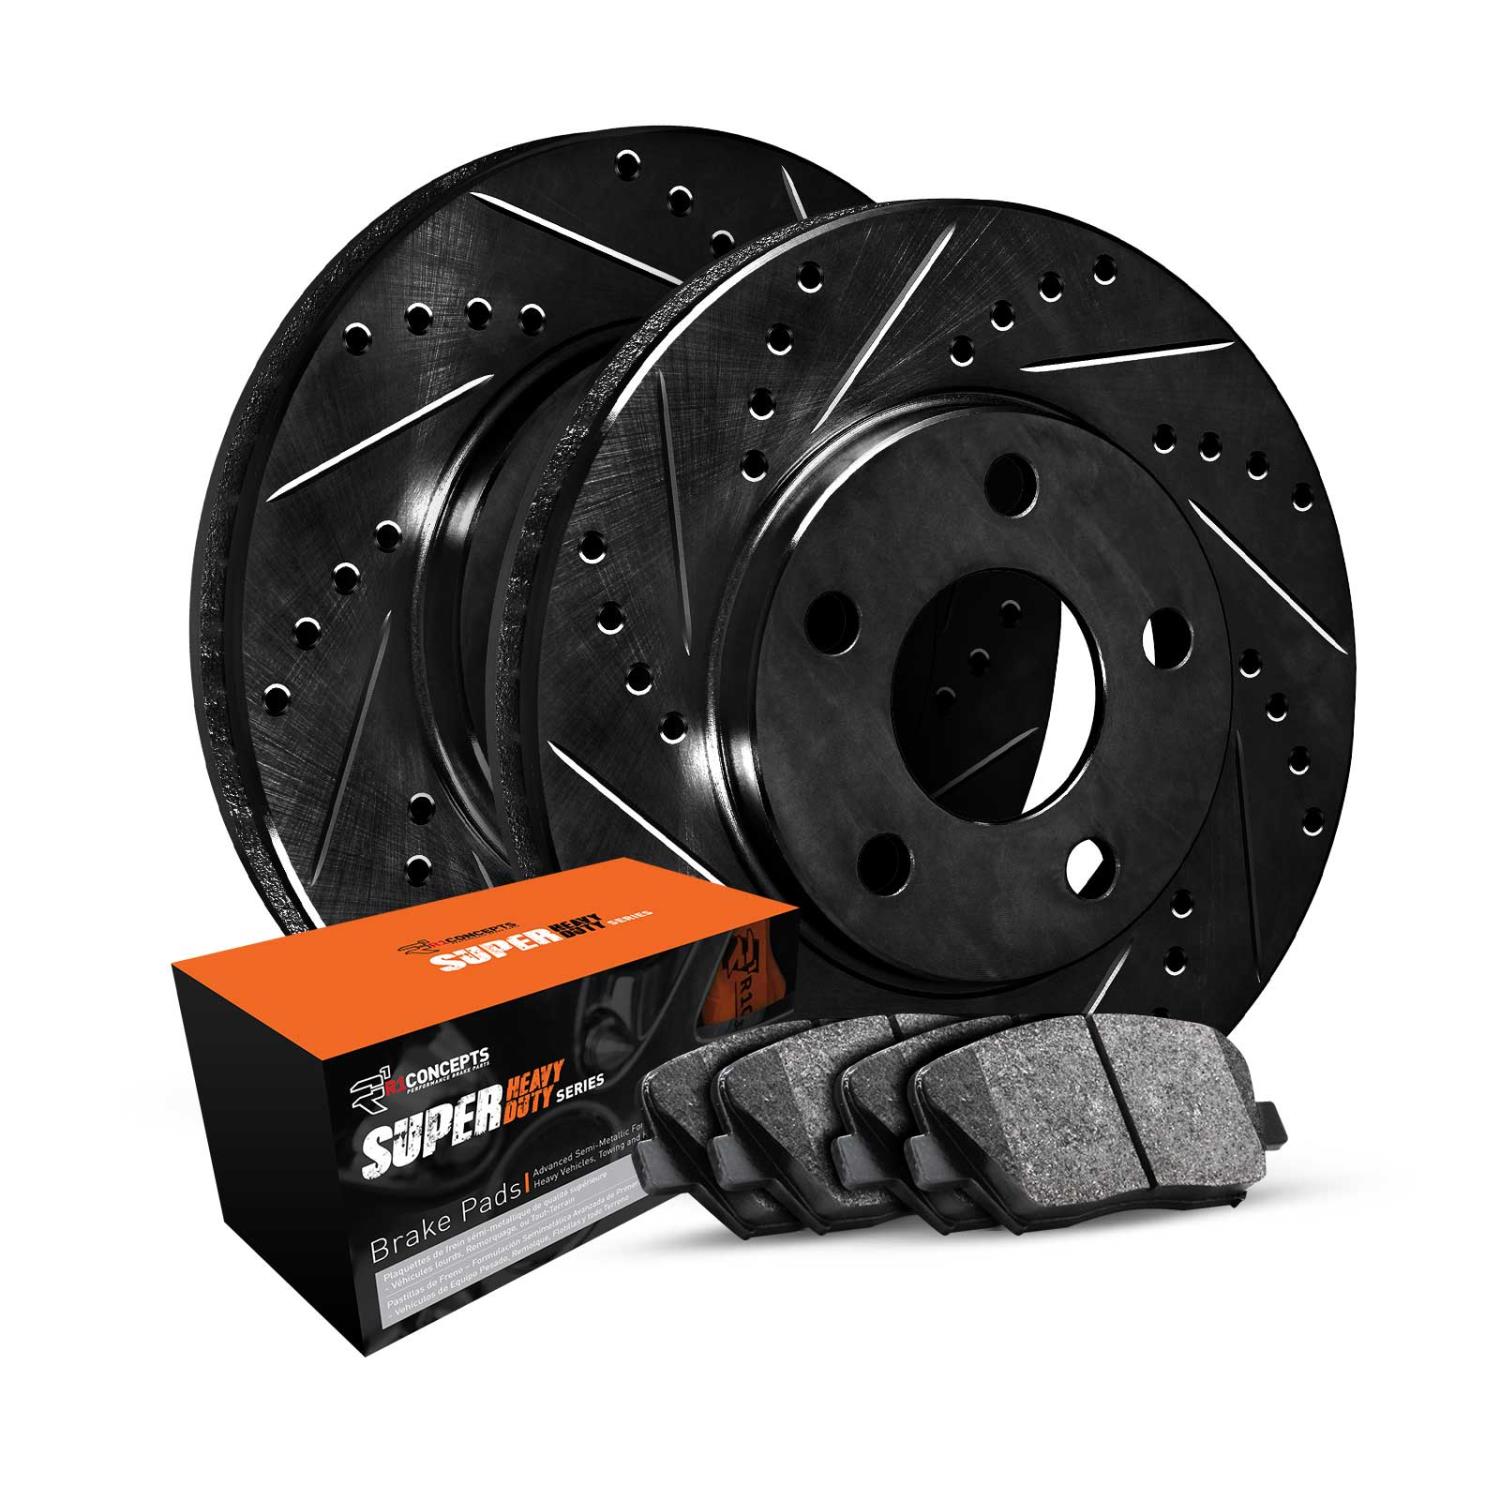 E-Line Drilled & Slotted Black Brake Rotor Set w/Super-Duty Pads, Fits Select Fits Multiple Makes/Models, Position: Front